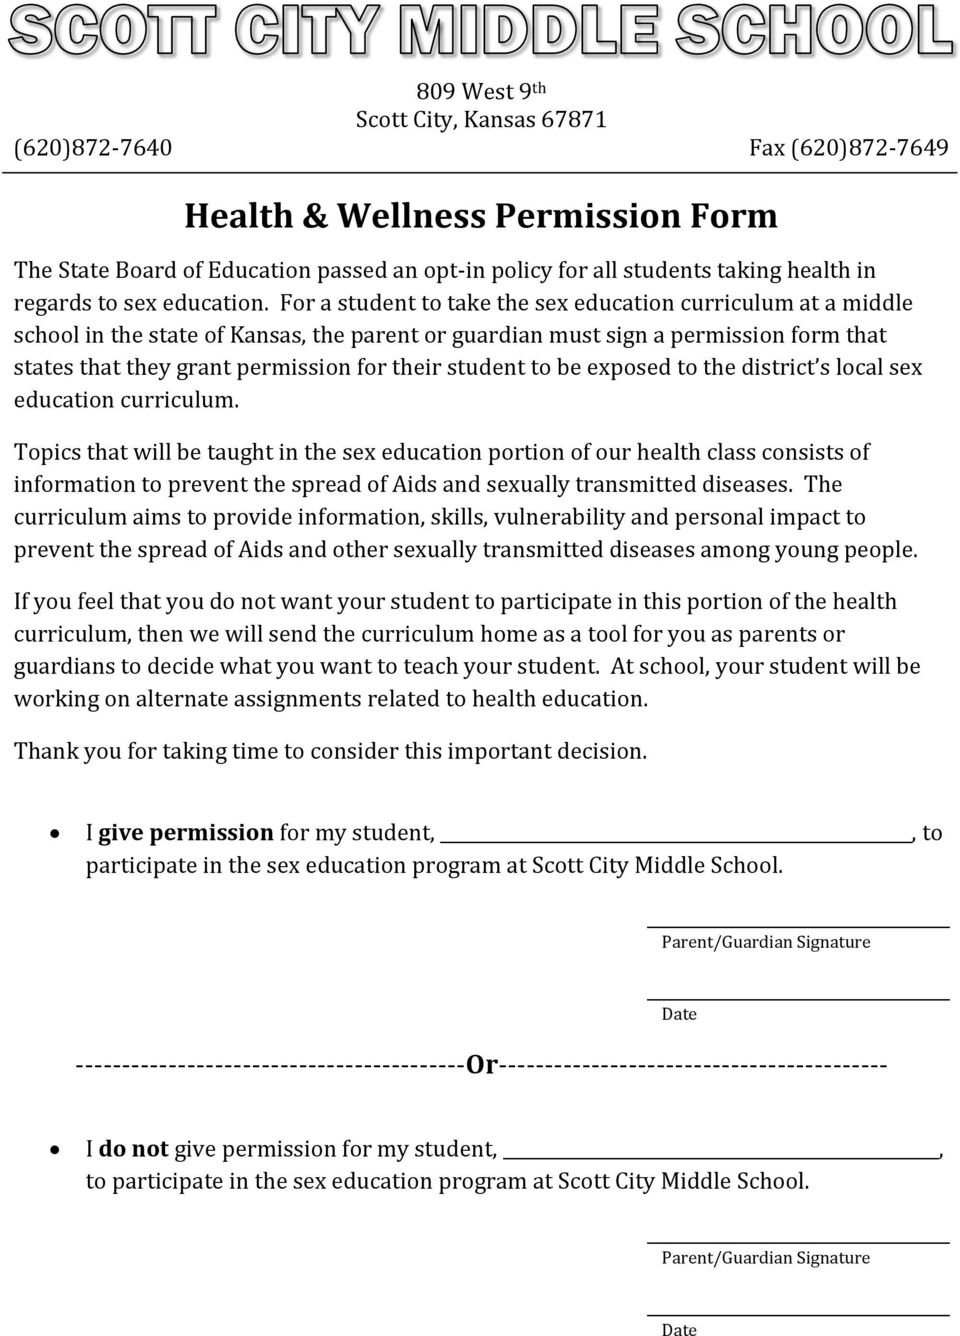 For a student to take the sex education curriculum at a middle school in the state of Kansas, the parent or guardian must sign a permission form that states that they grant permission for their